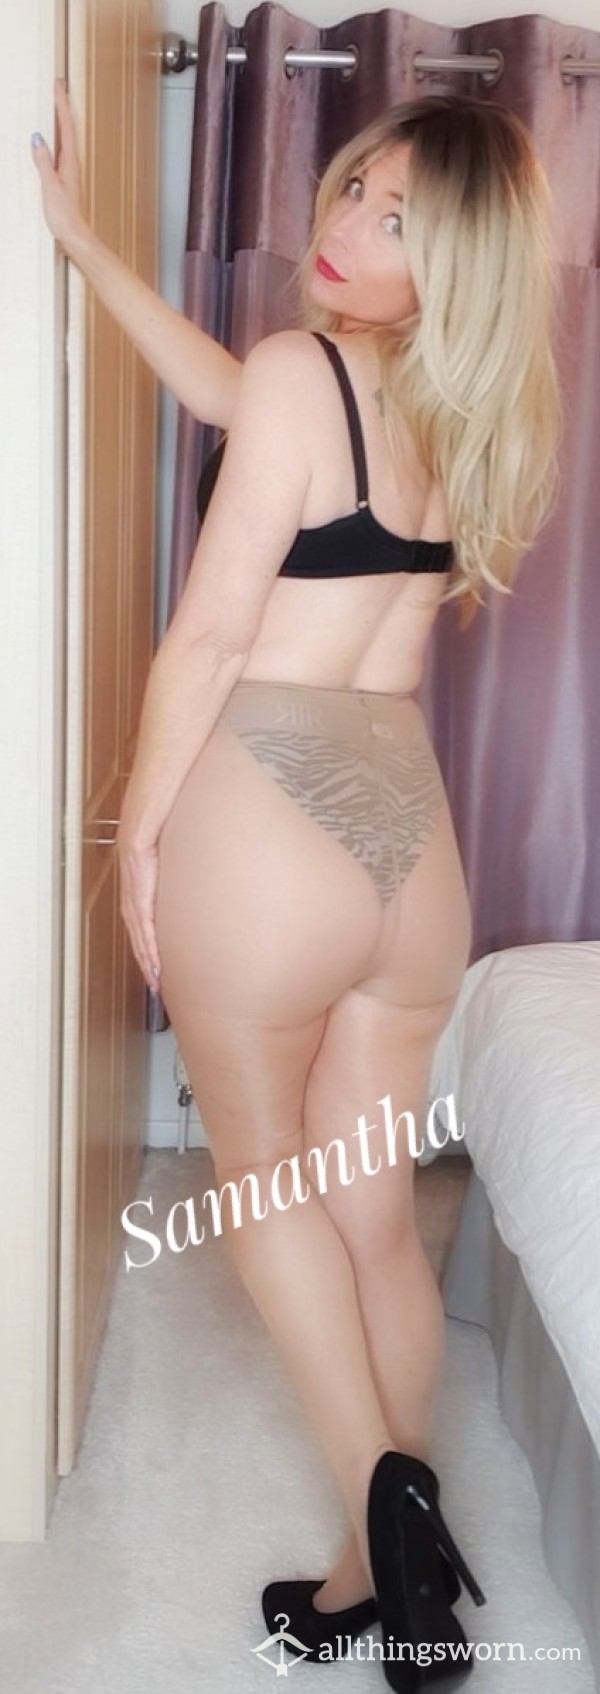 Double The Pleasure, Panties And Tights, Cums With 2 Days Wear, Stuffed, Sexy Digital Photo Set And Free 1st Class Postage.